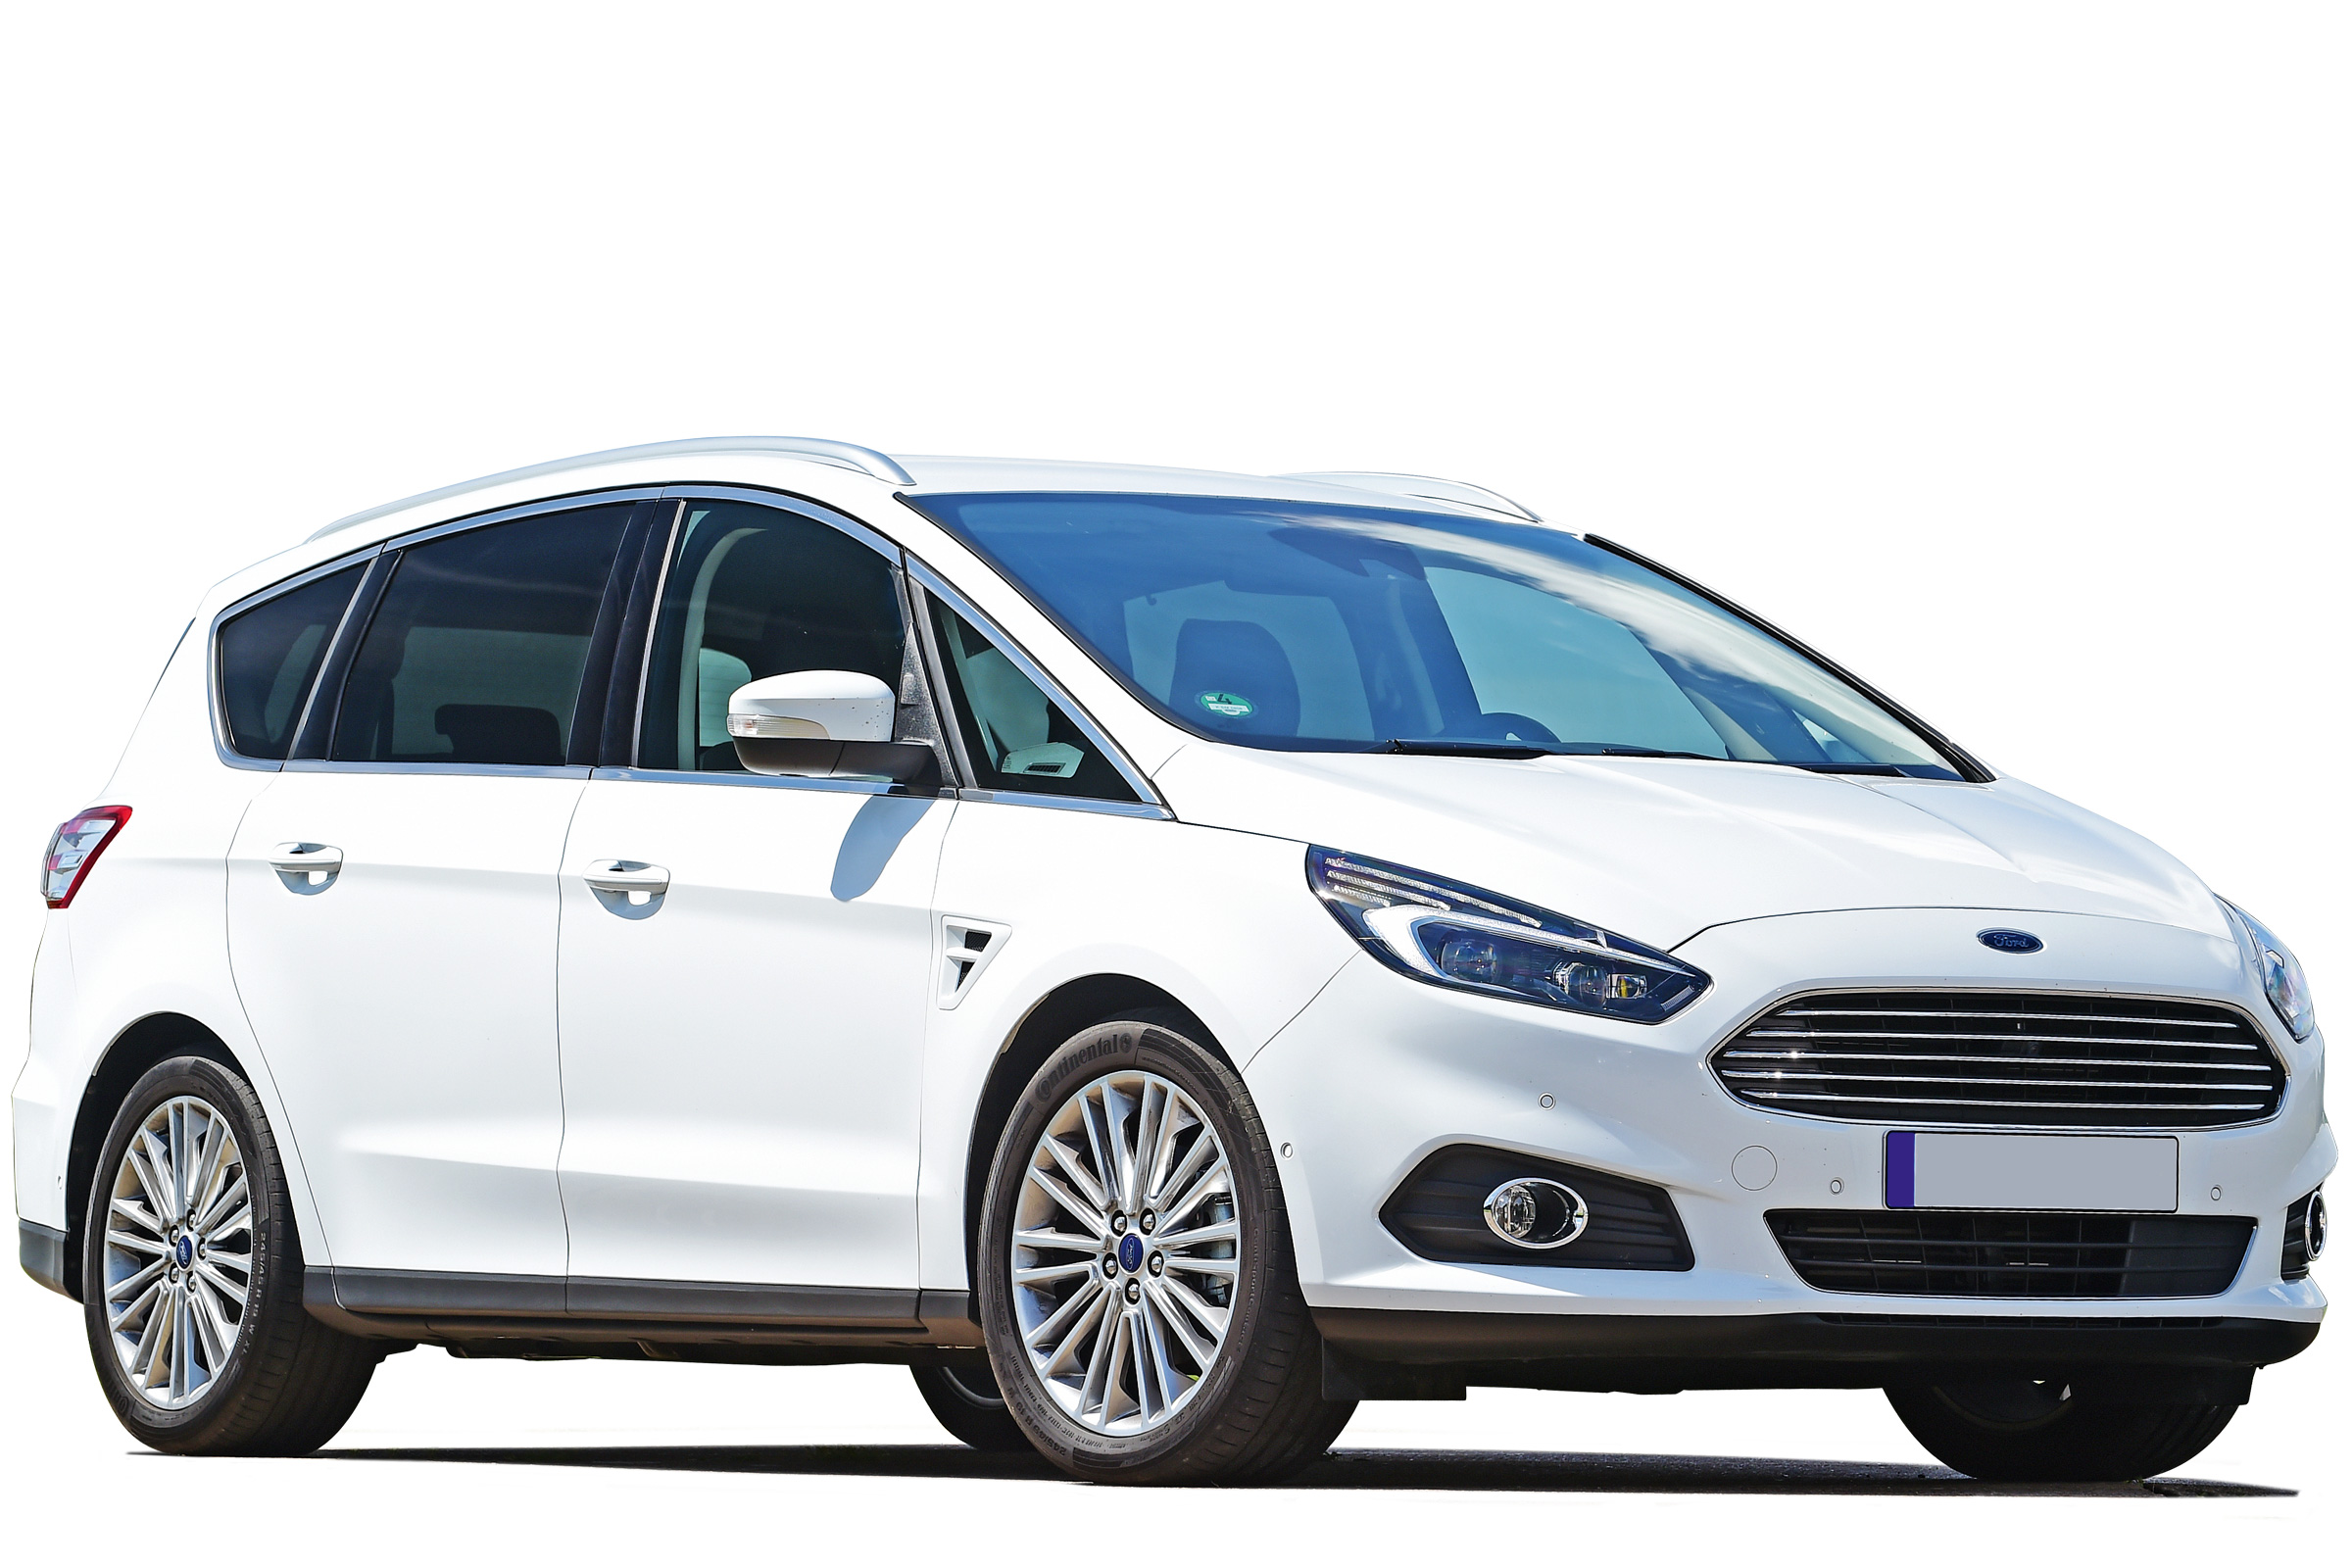 Ford SMAX MPV 2020 review Carbuyer